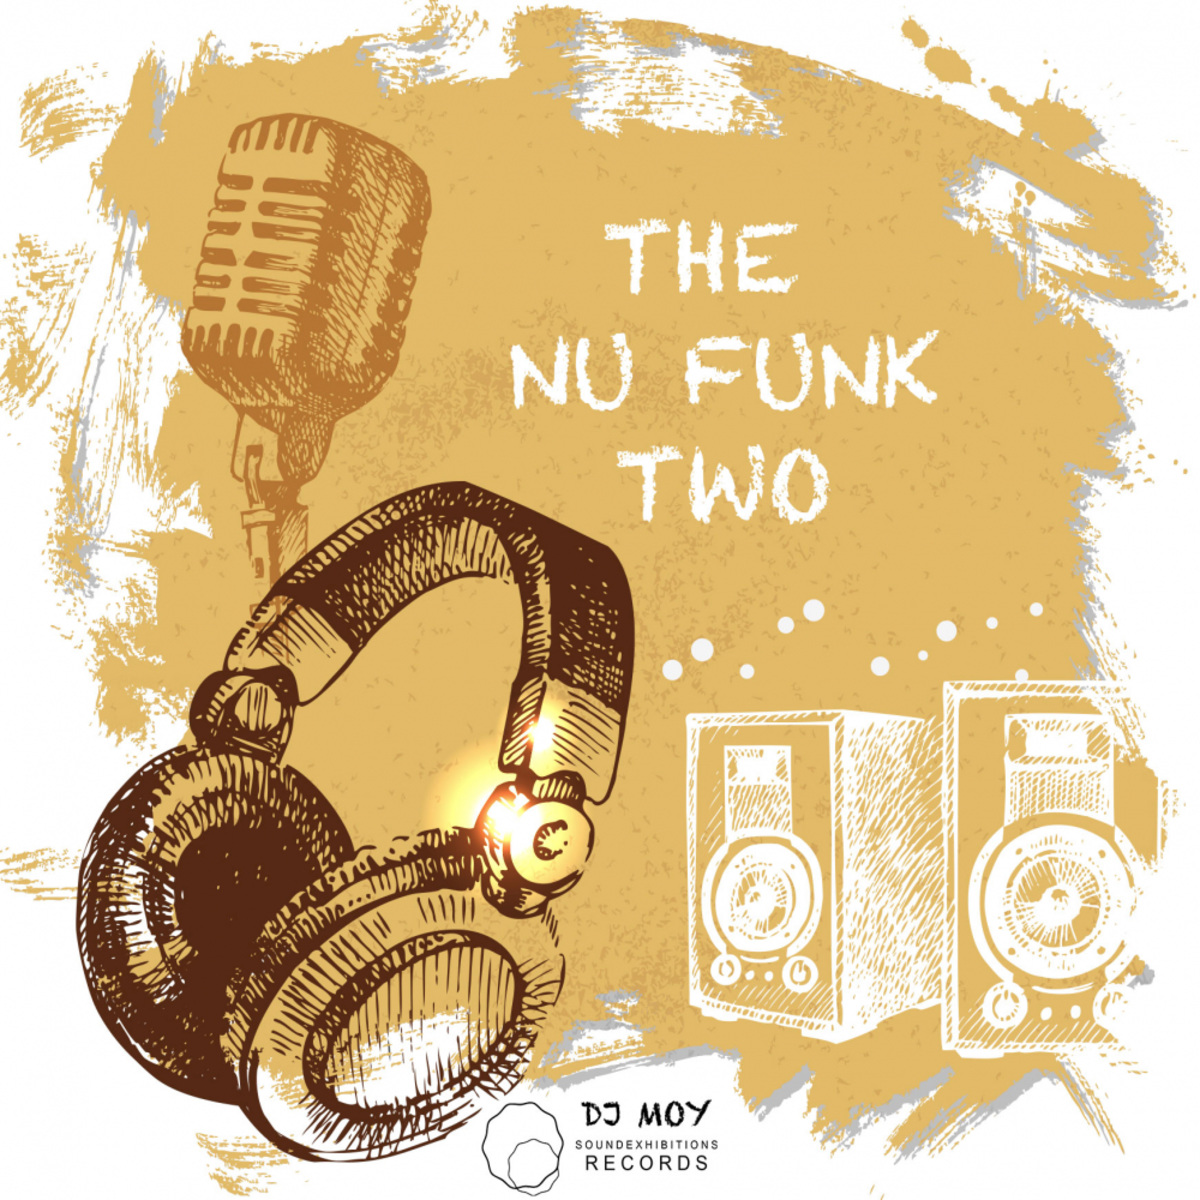 Dj Moy - The Nu Funk Two / Sound-Exhibitions-Records